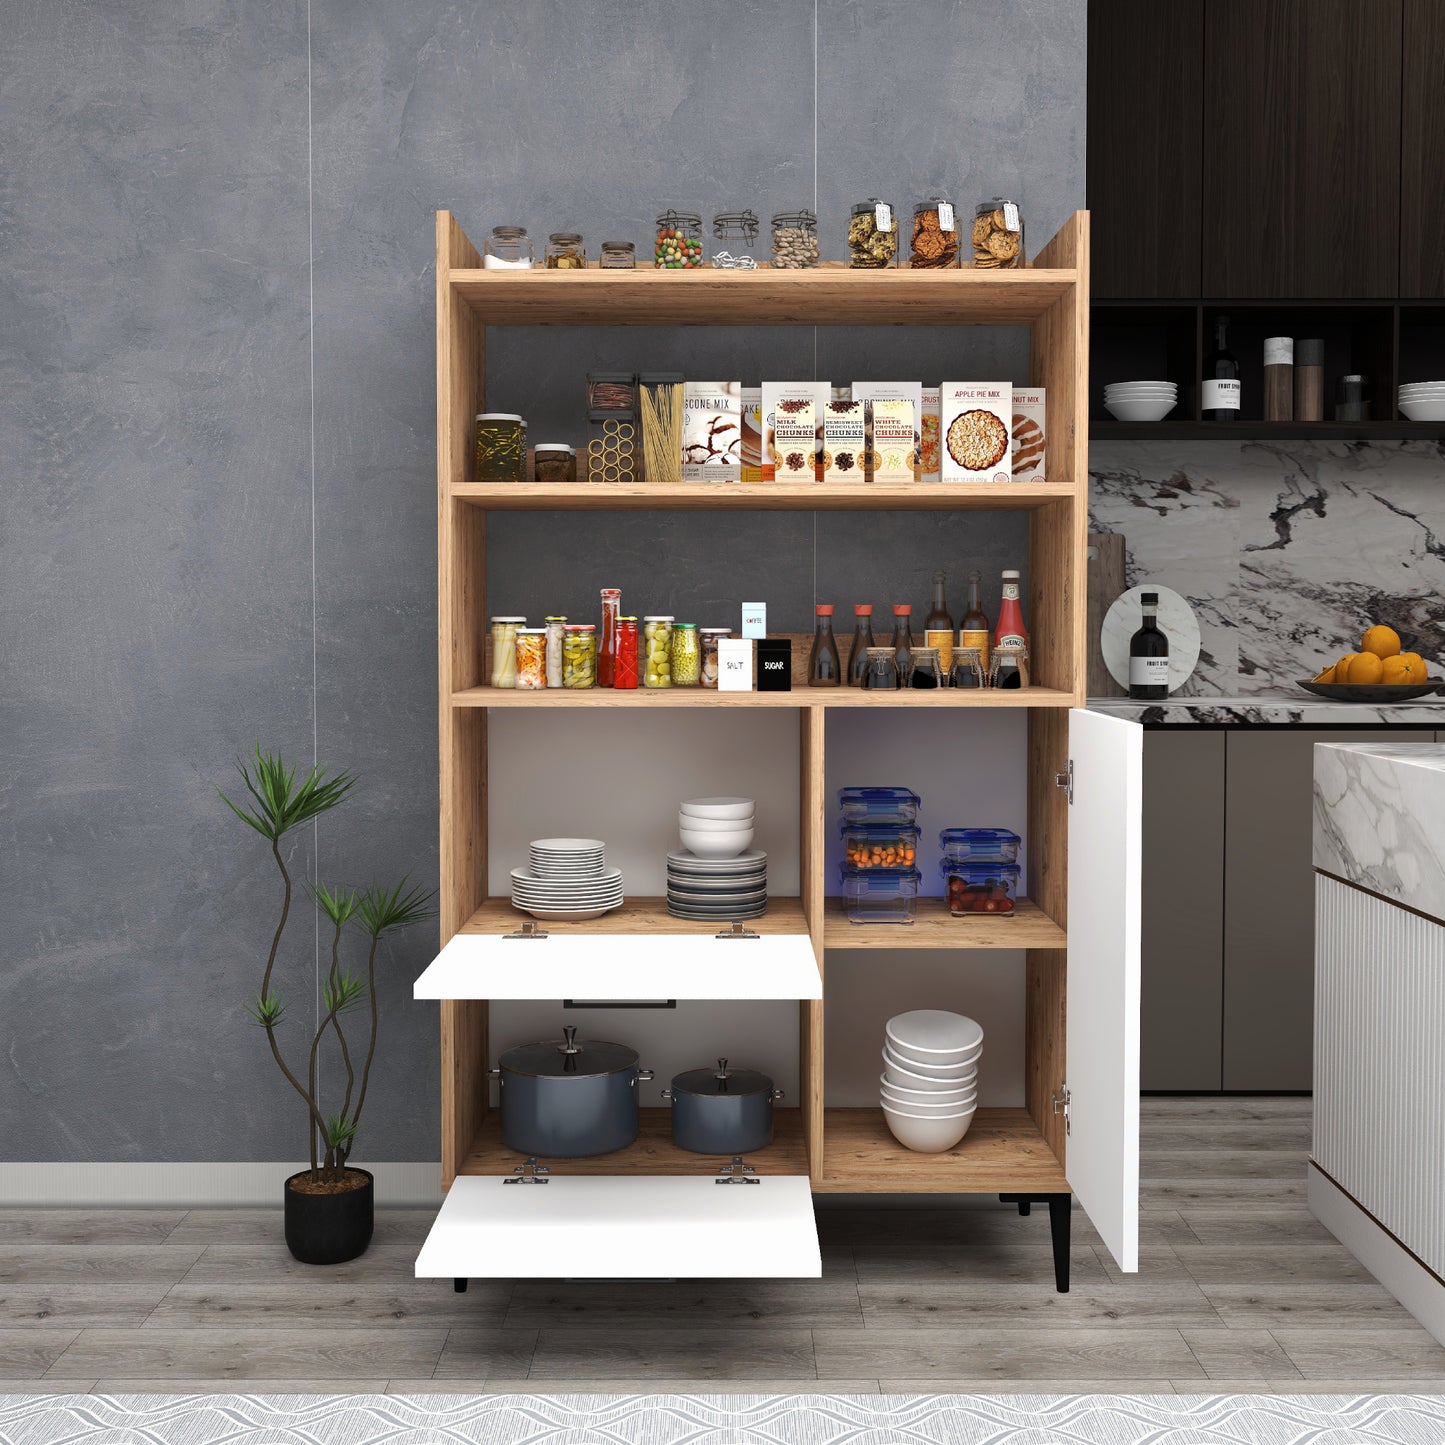 Caleb Kitchen Cabinet with Shelves